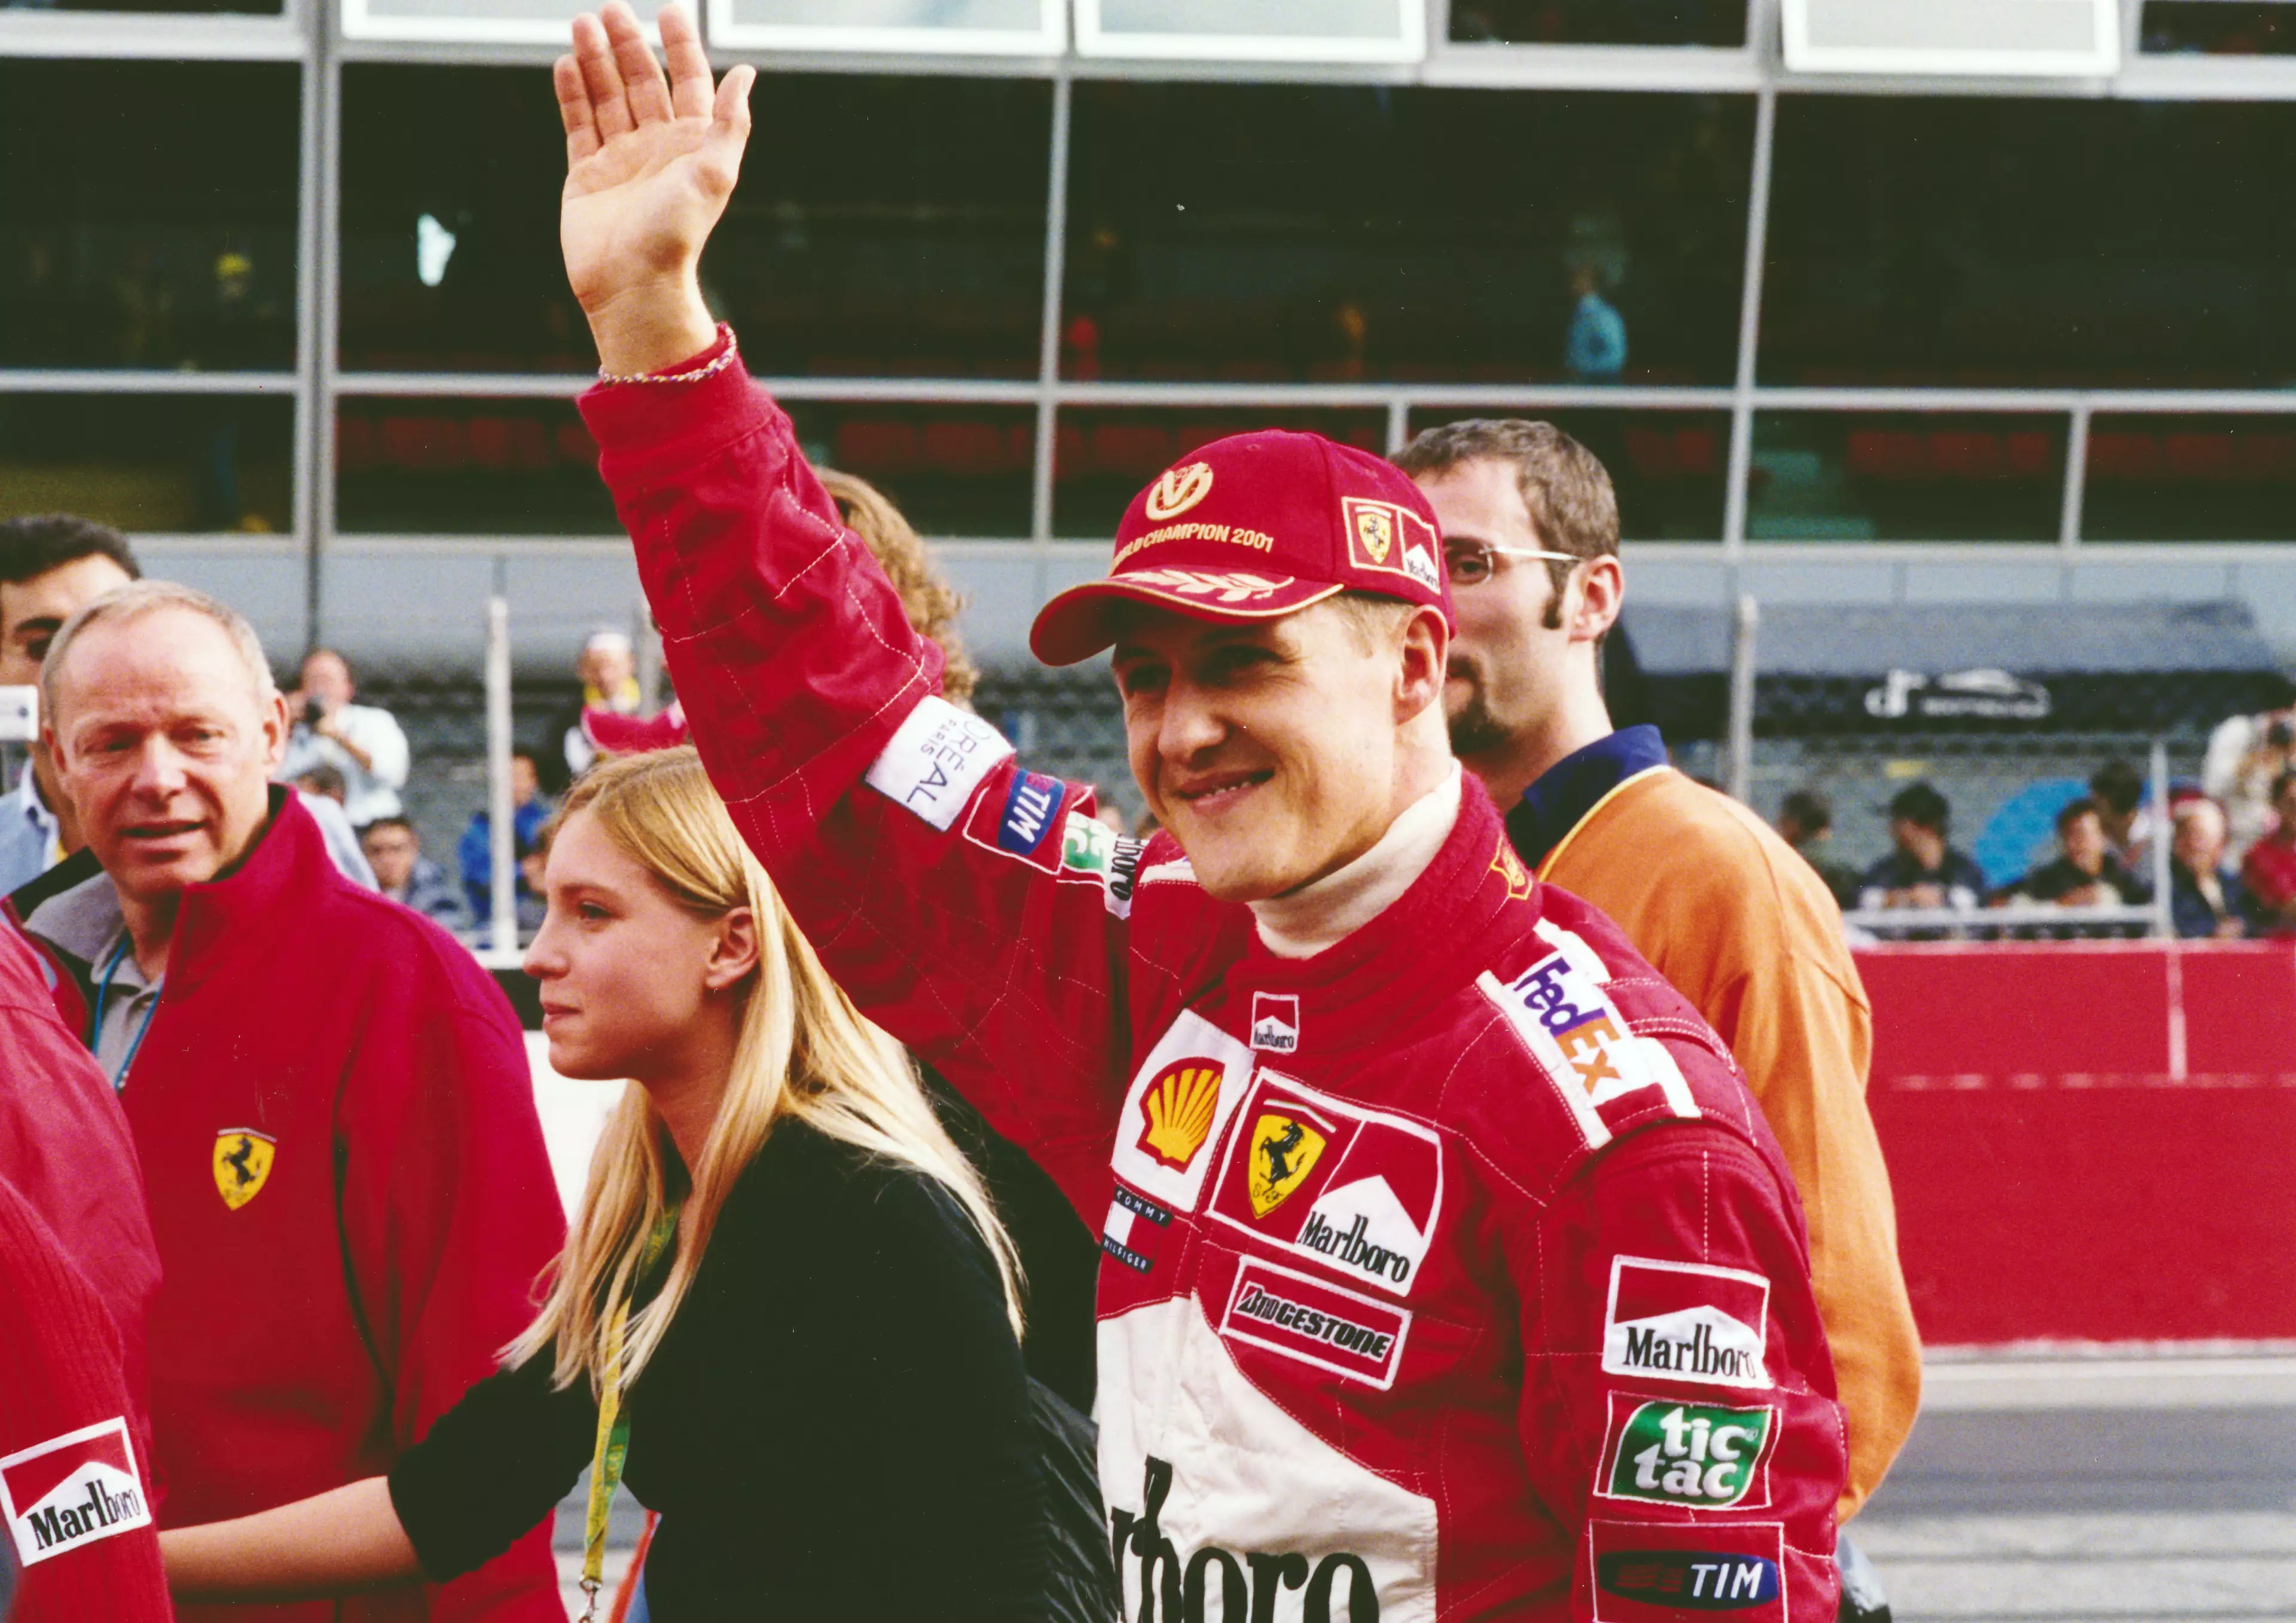 Schumacher sustained a severe brain injury while skiing in 2013.